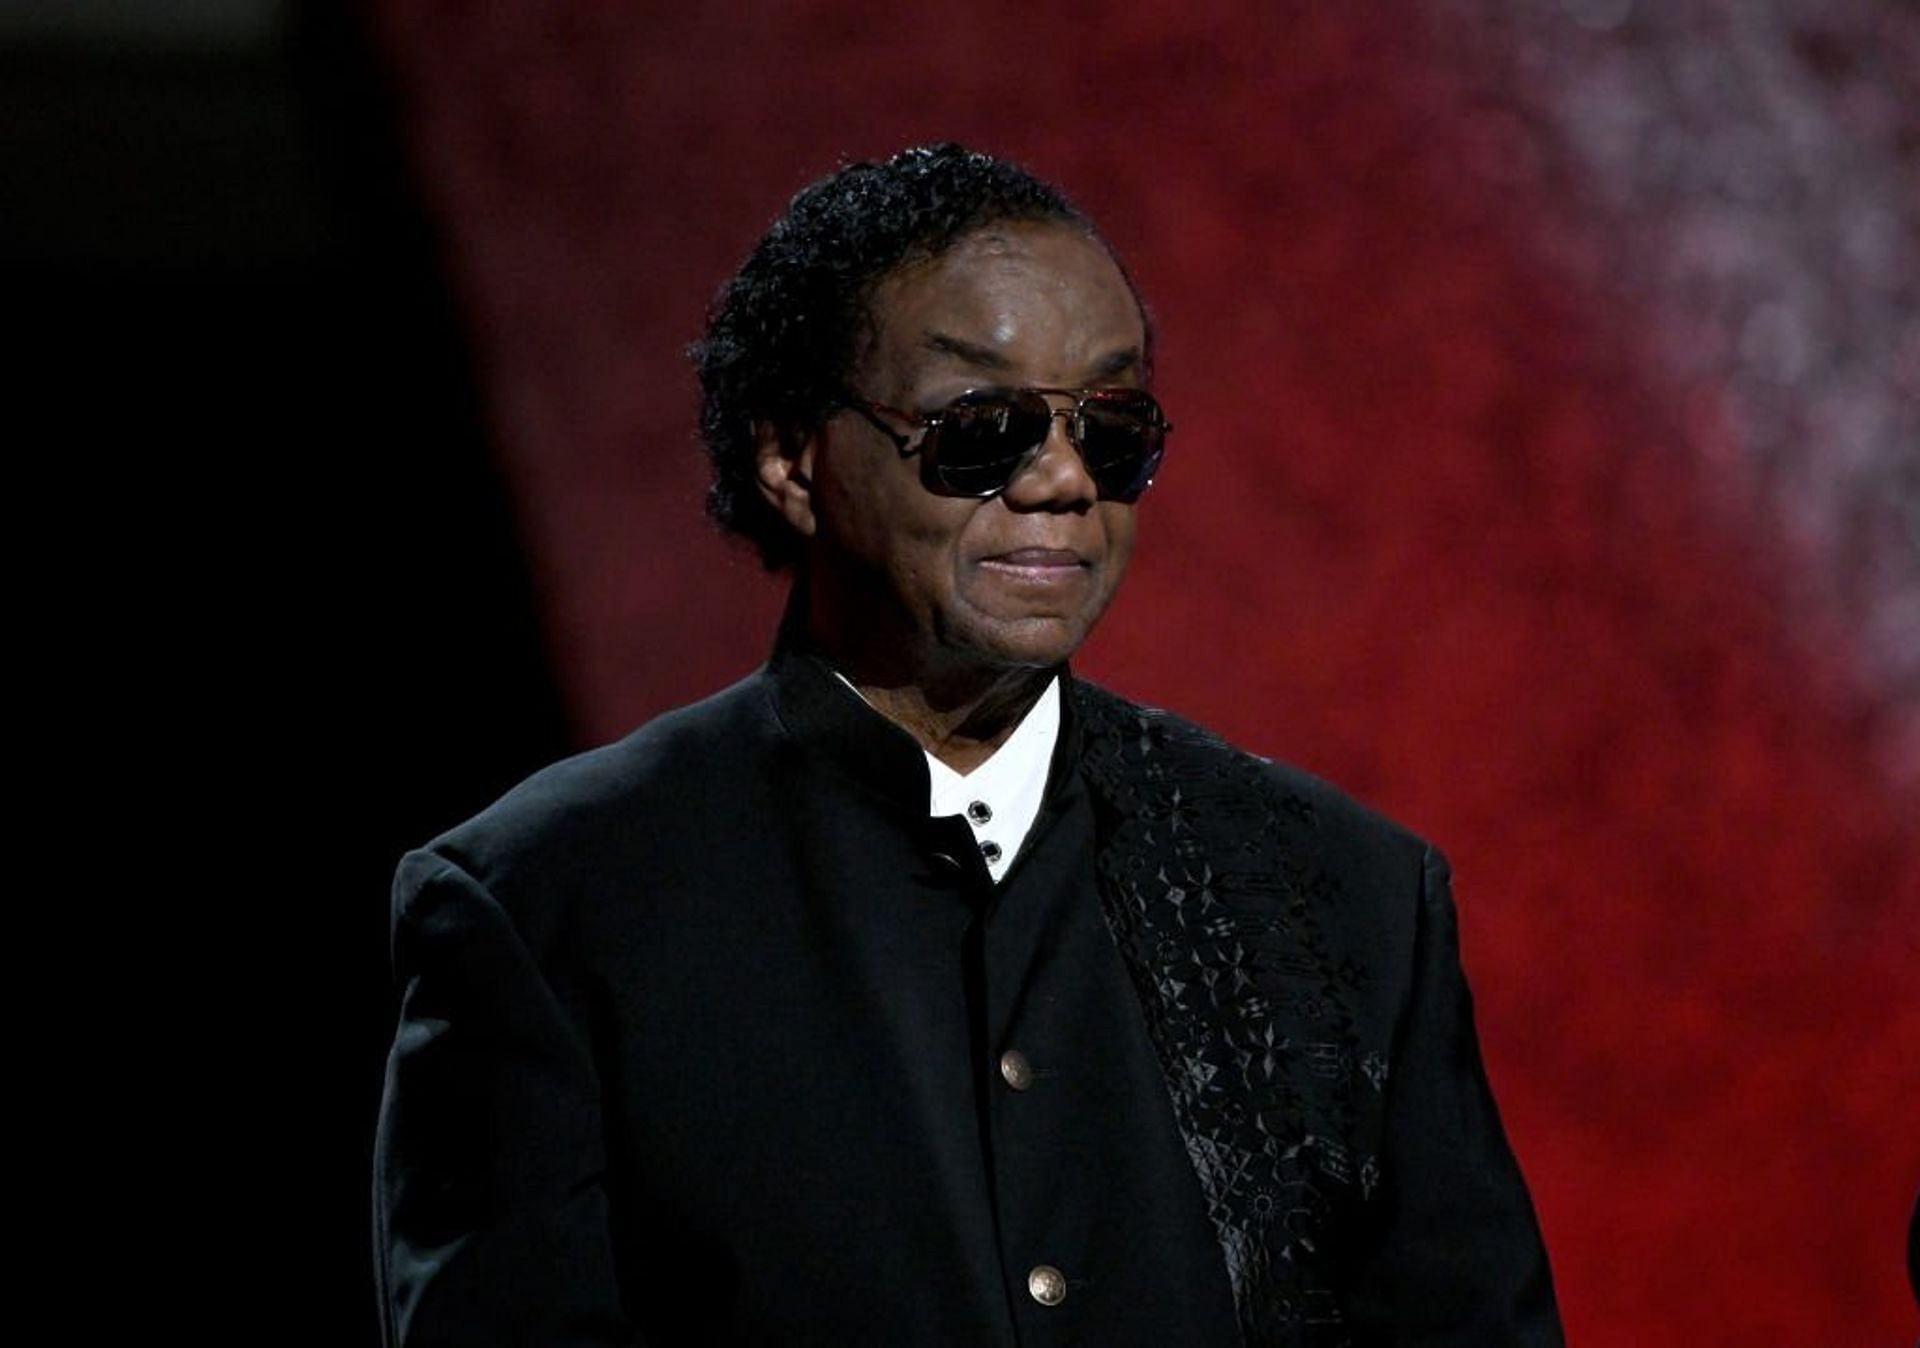 Lamont Dozier recently died at the age of 81 (Image via Michael Kovac/Getty Images)